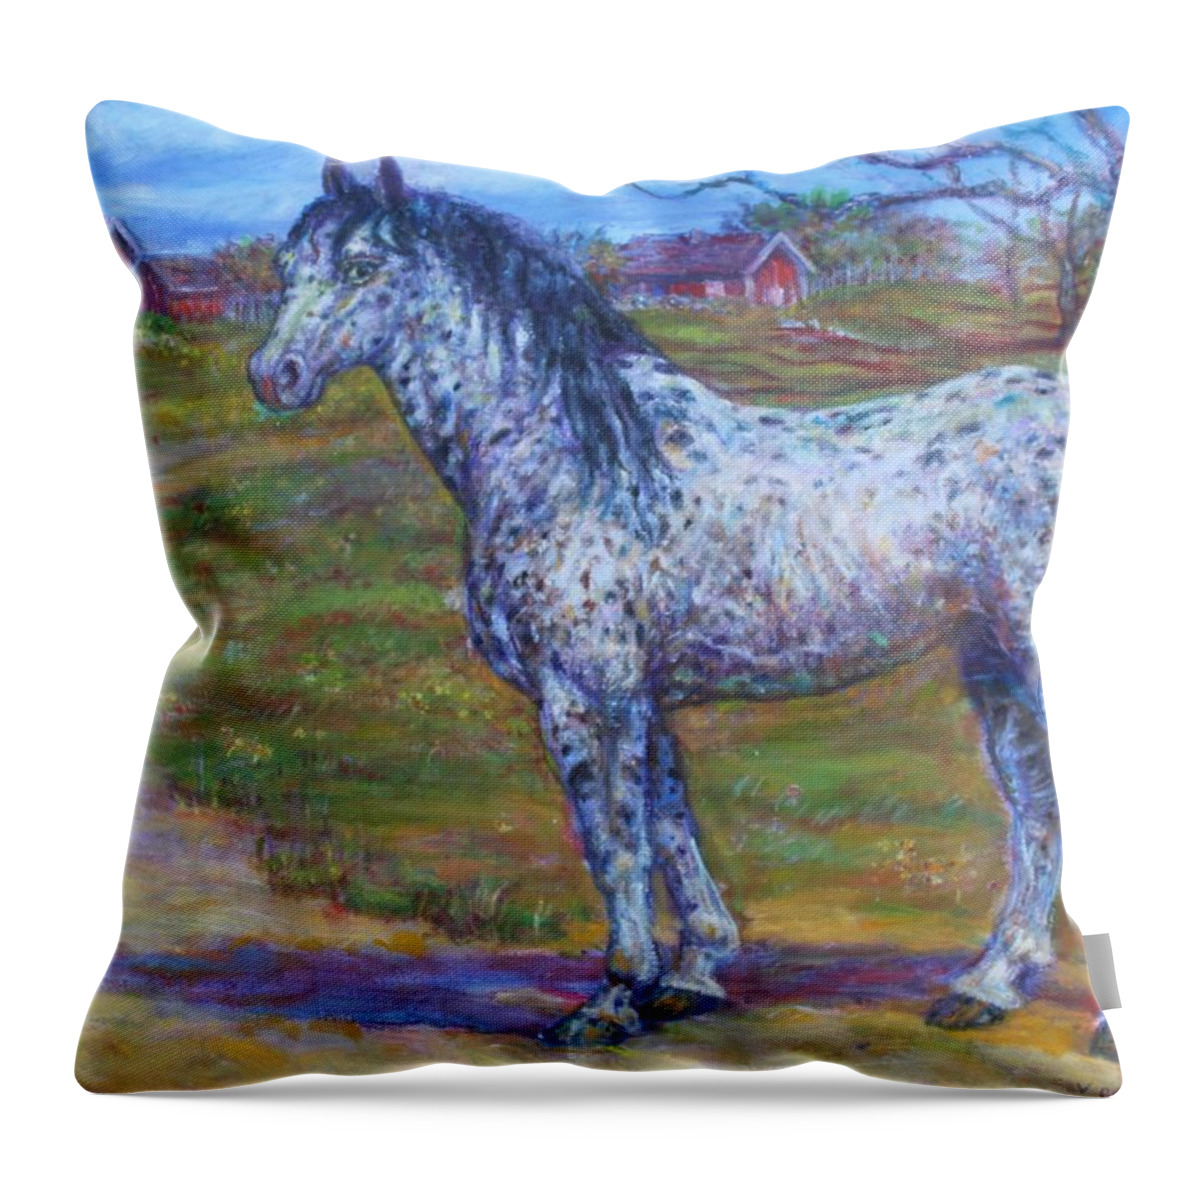 White Spotted Horse Appaloosa Horse Throw Pillow featuring the painting Appaloosa Horse by Veronica Cassell vaz